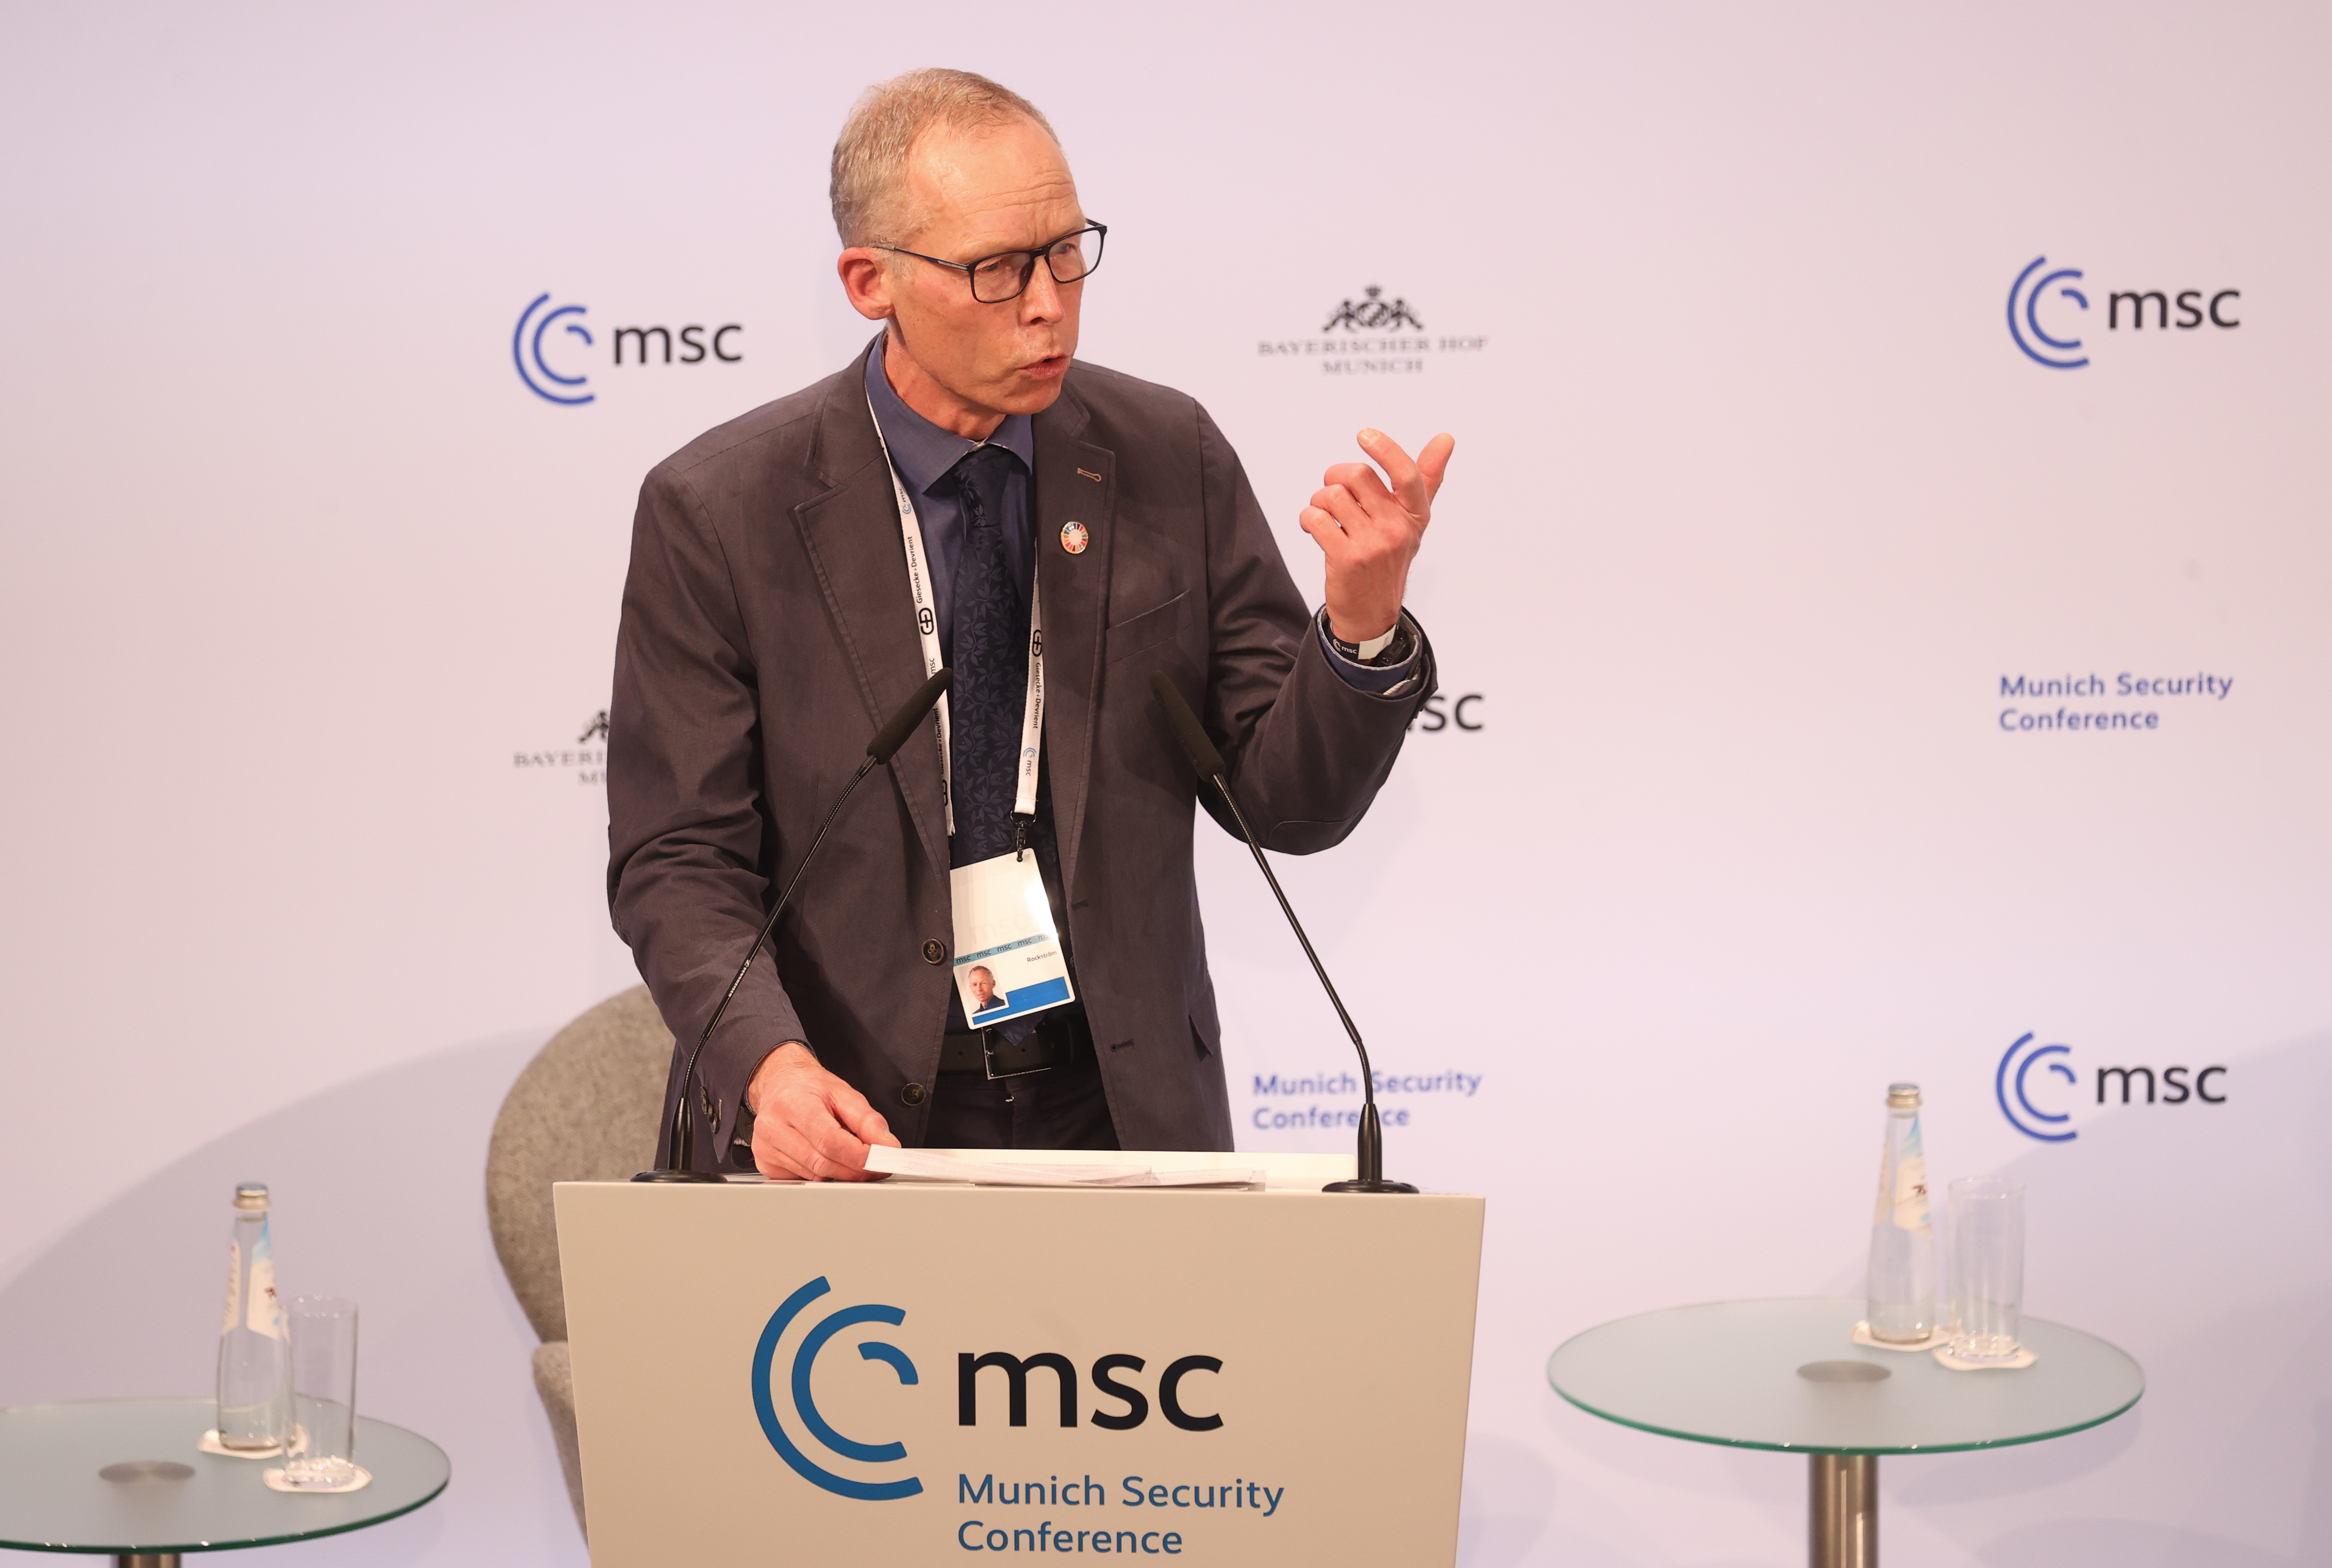 Rockström on Climate Risk and Conflict at Munich Security Conference